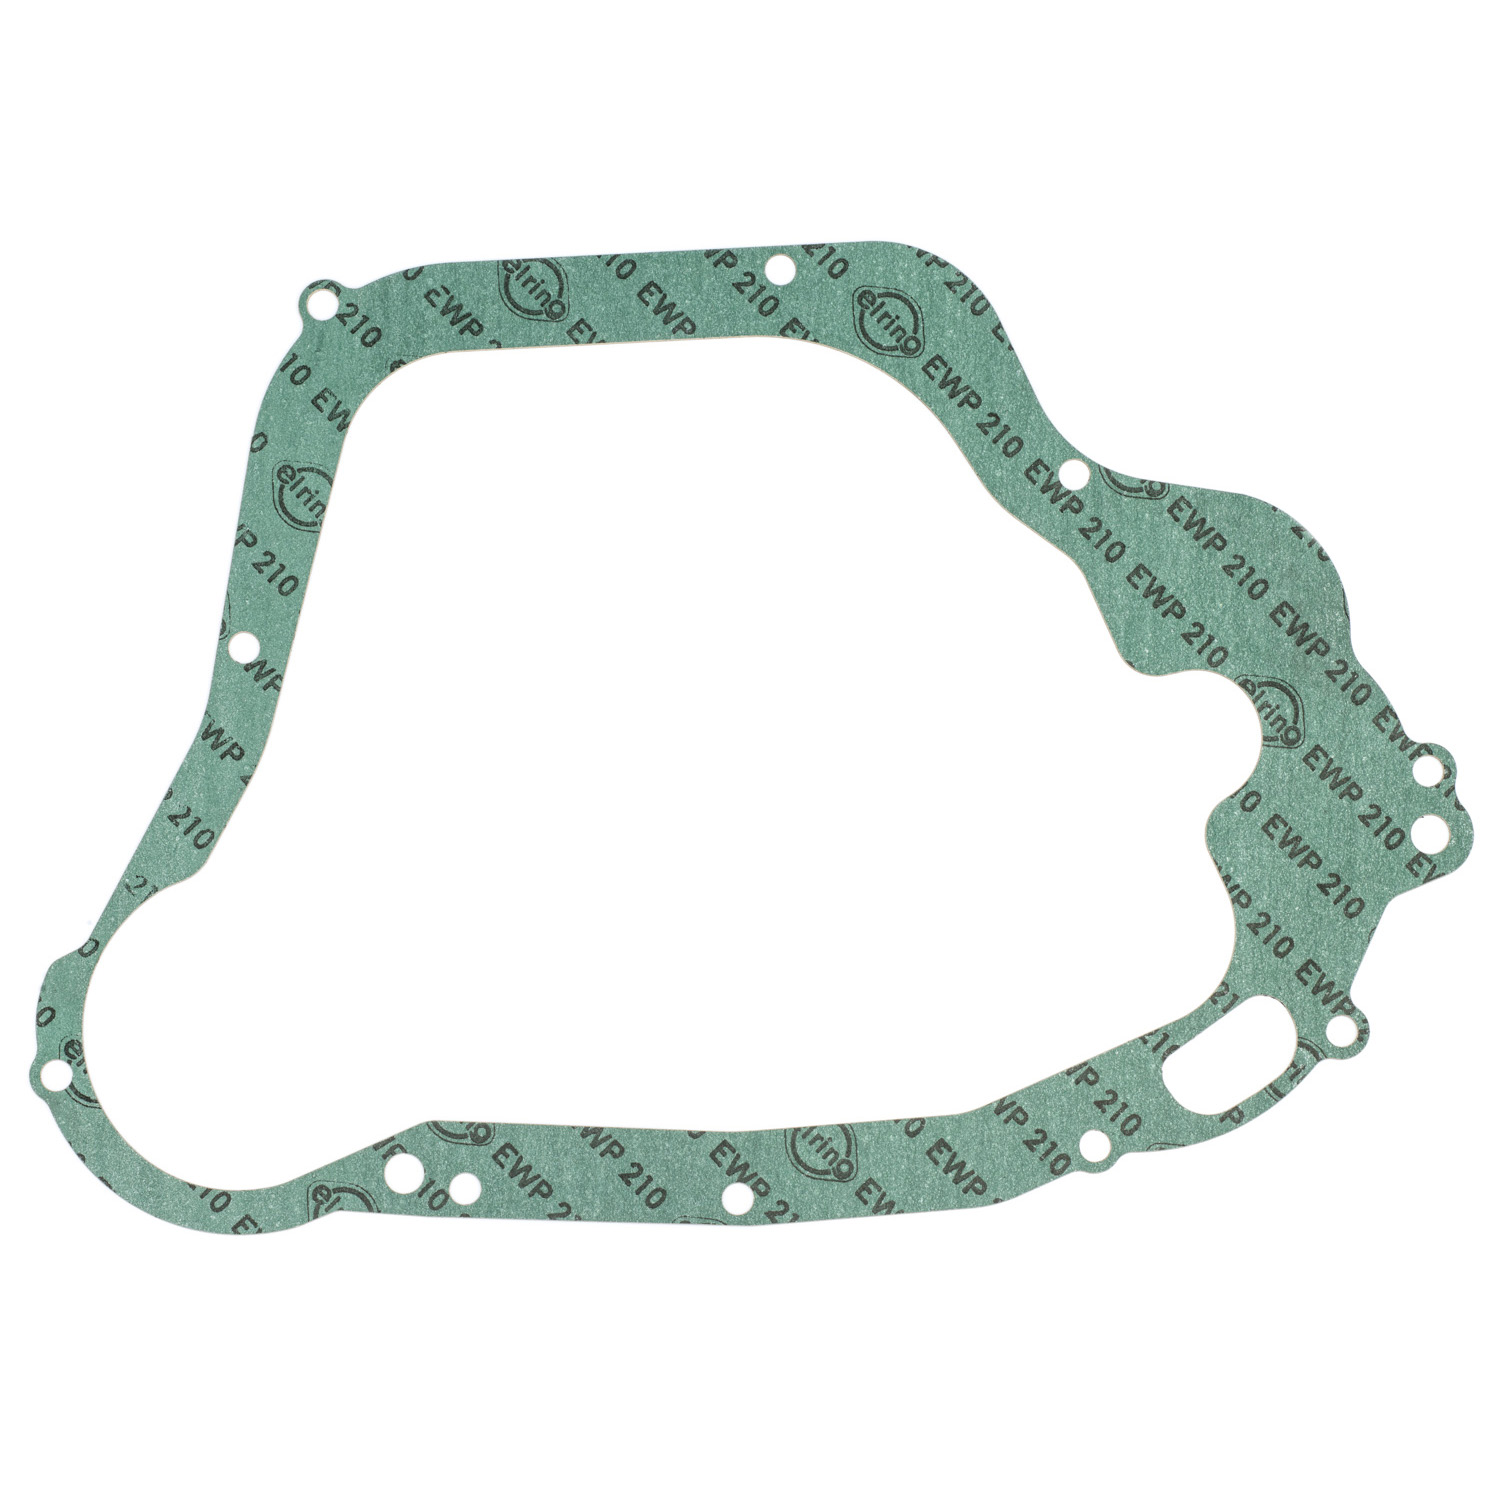 TZR250RSP Clutch Cover Gasket